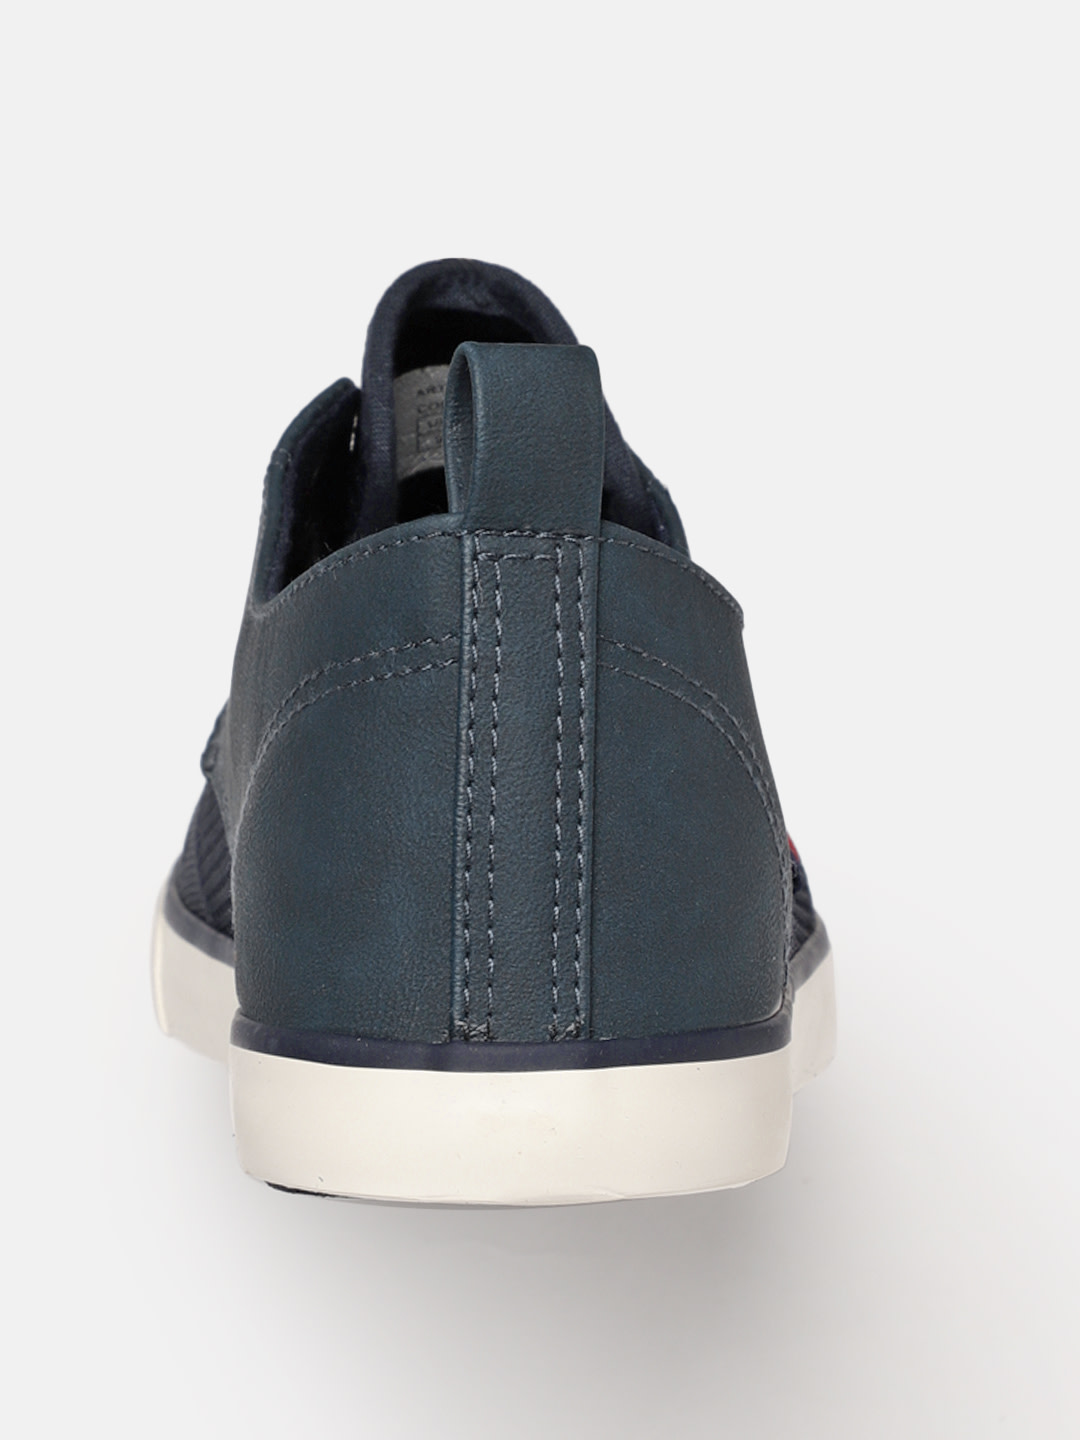 mast and harbour navy blue sneakers